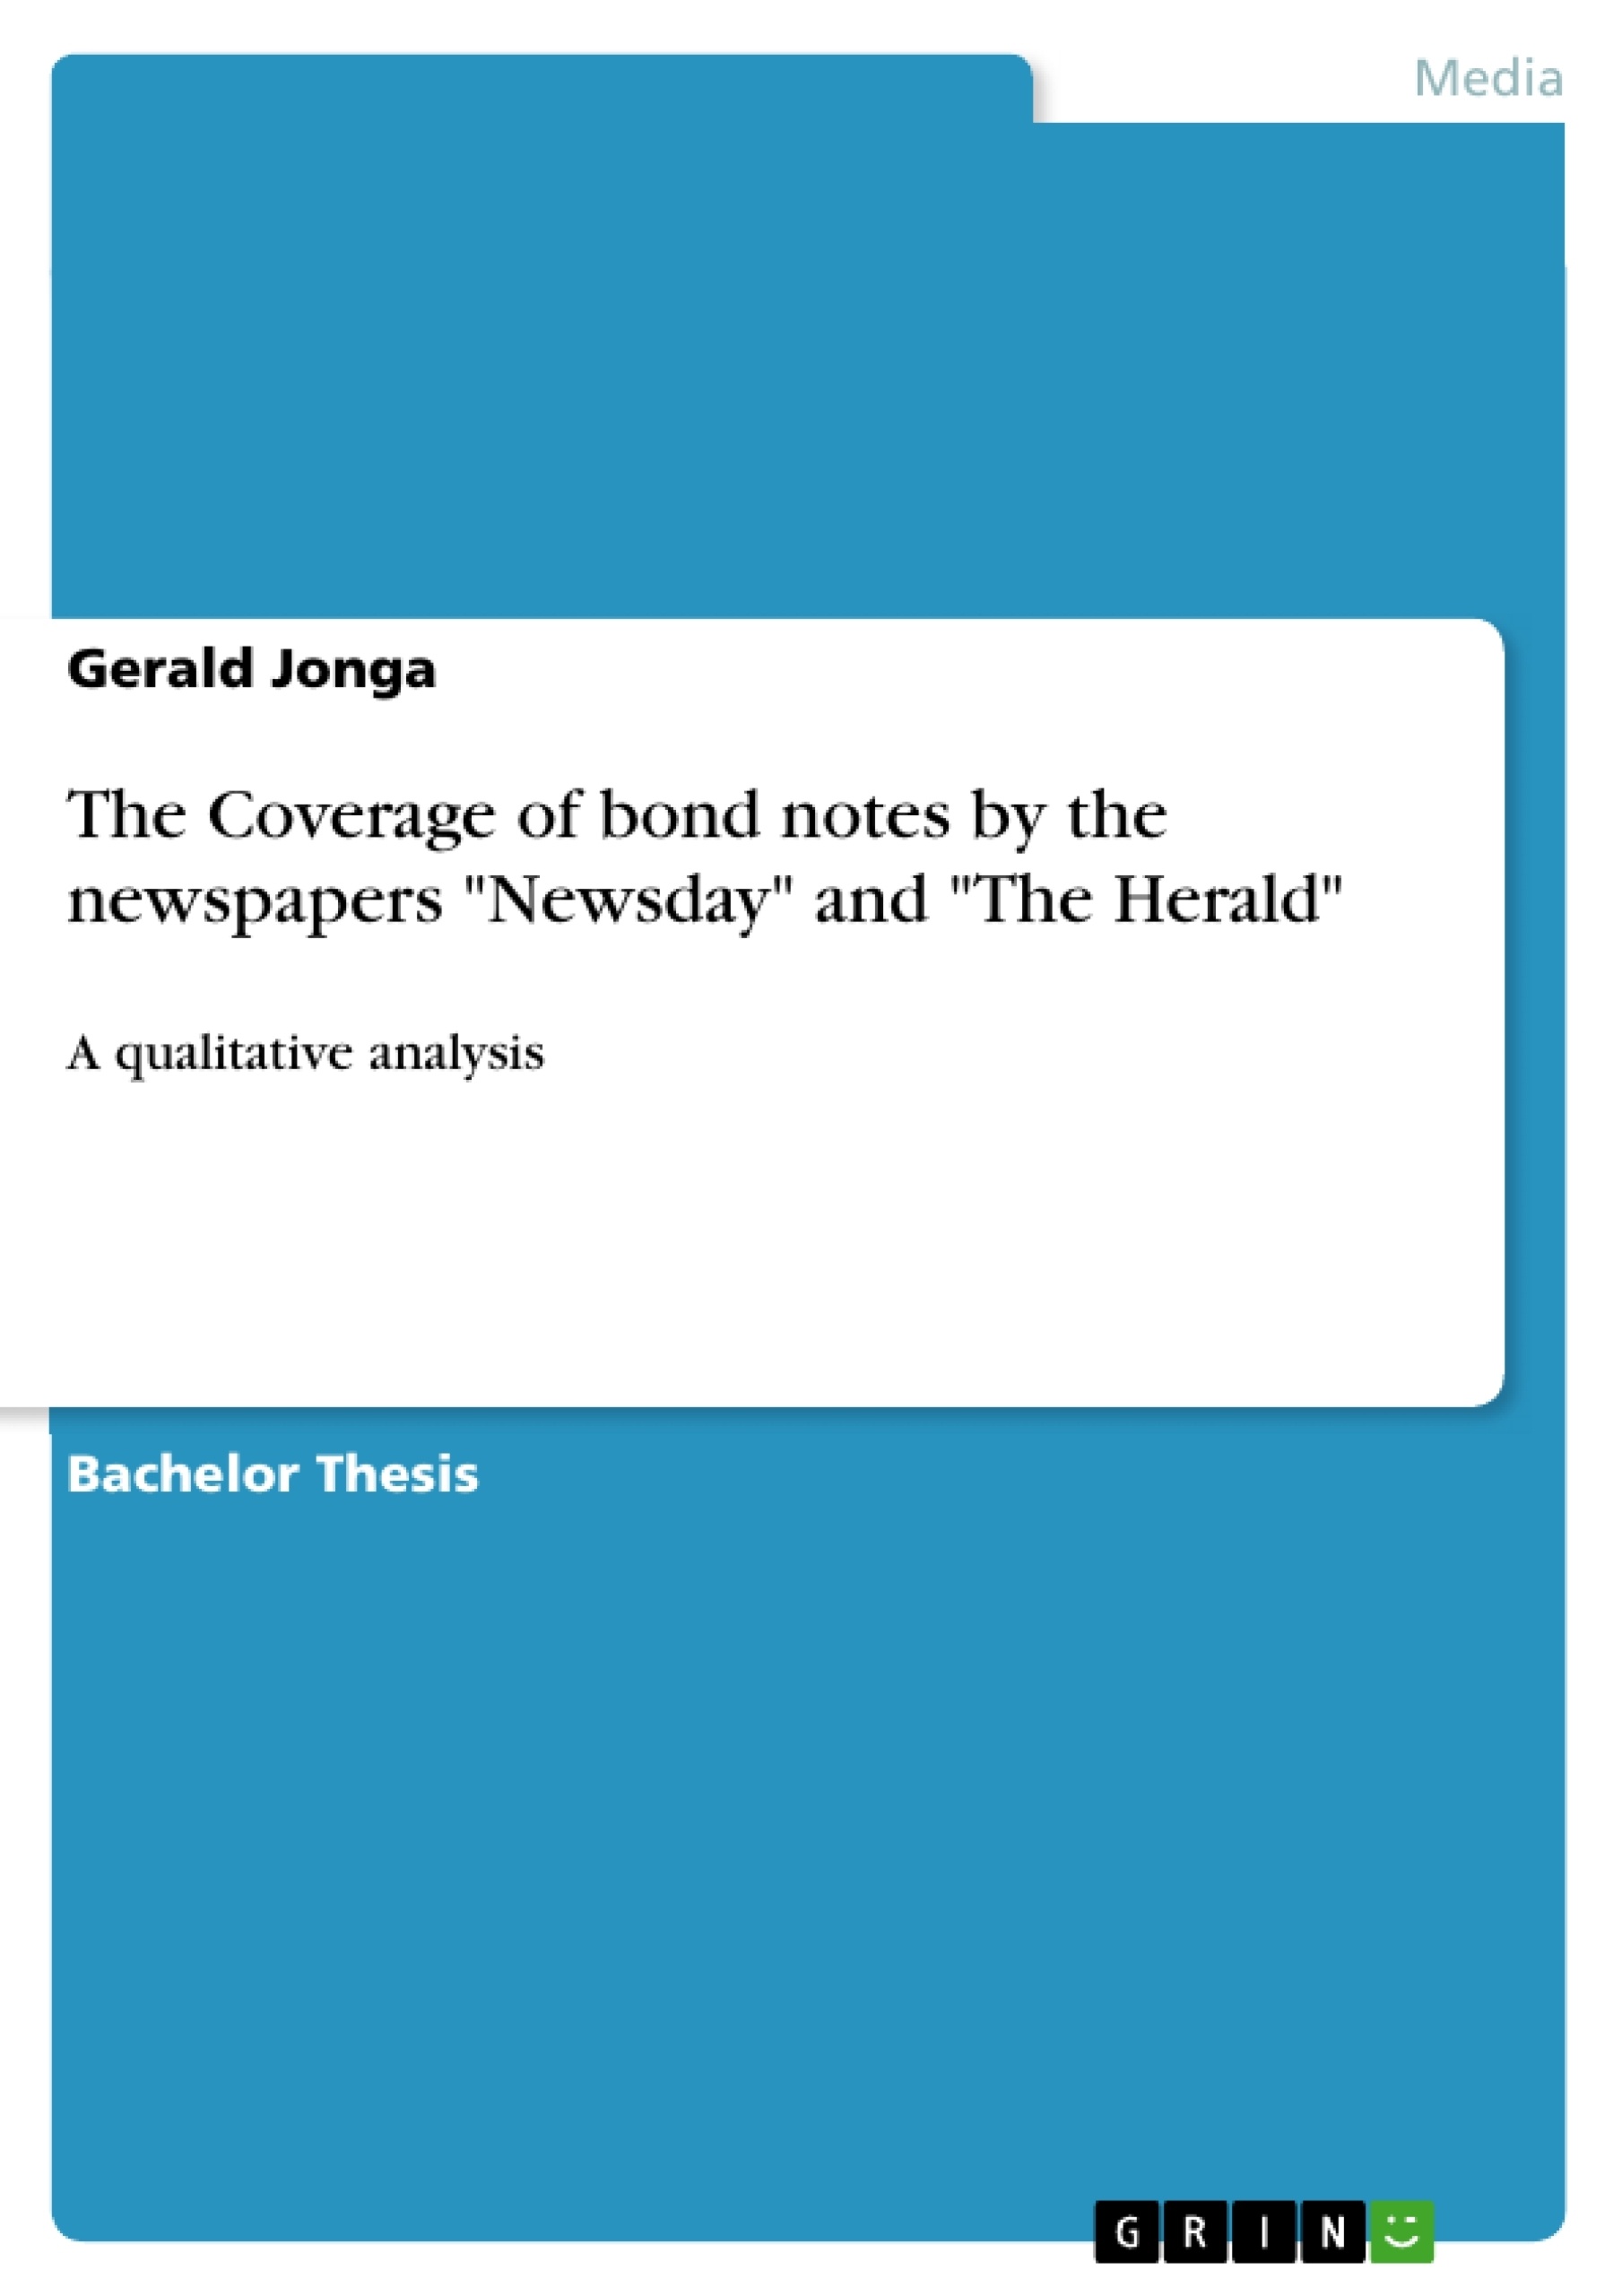 Título: The Coverage of bond notes by the newspapers "Newsday" and "The Herald"